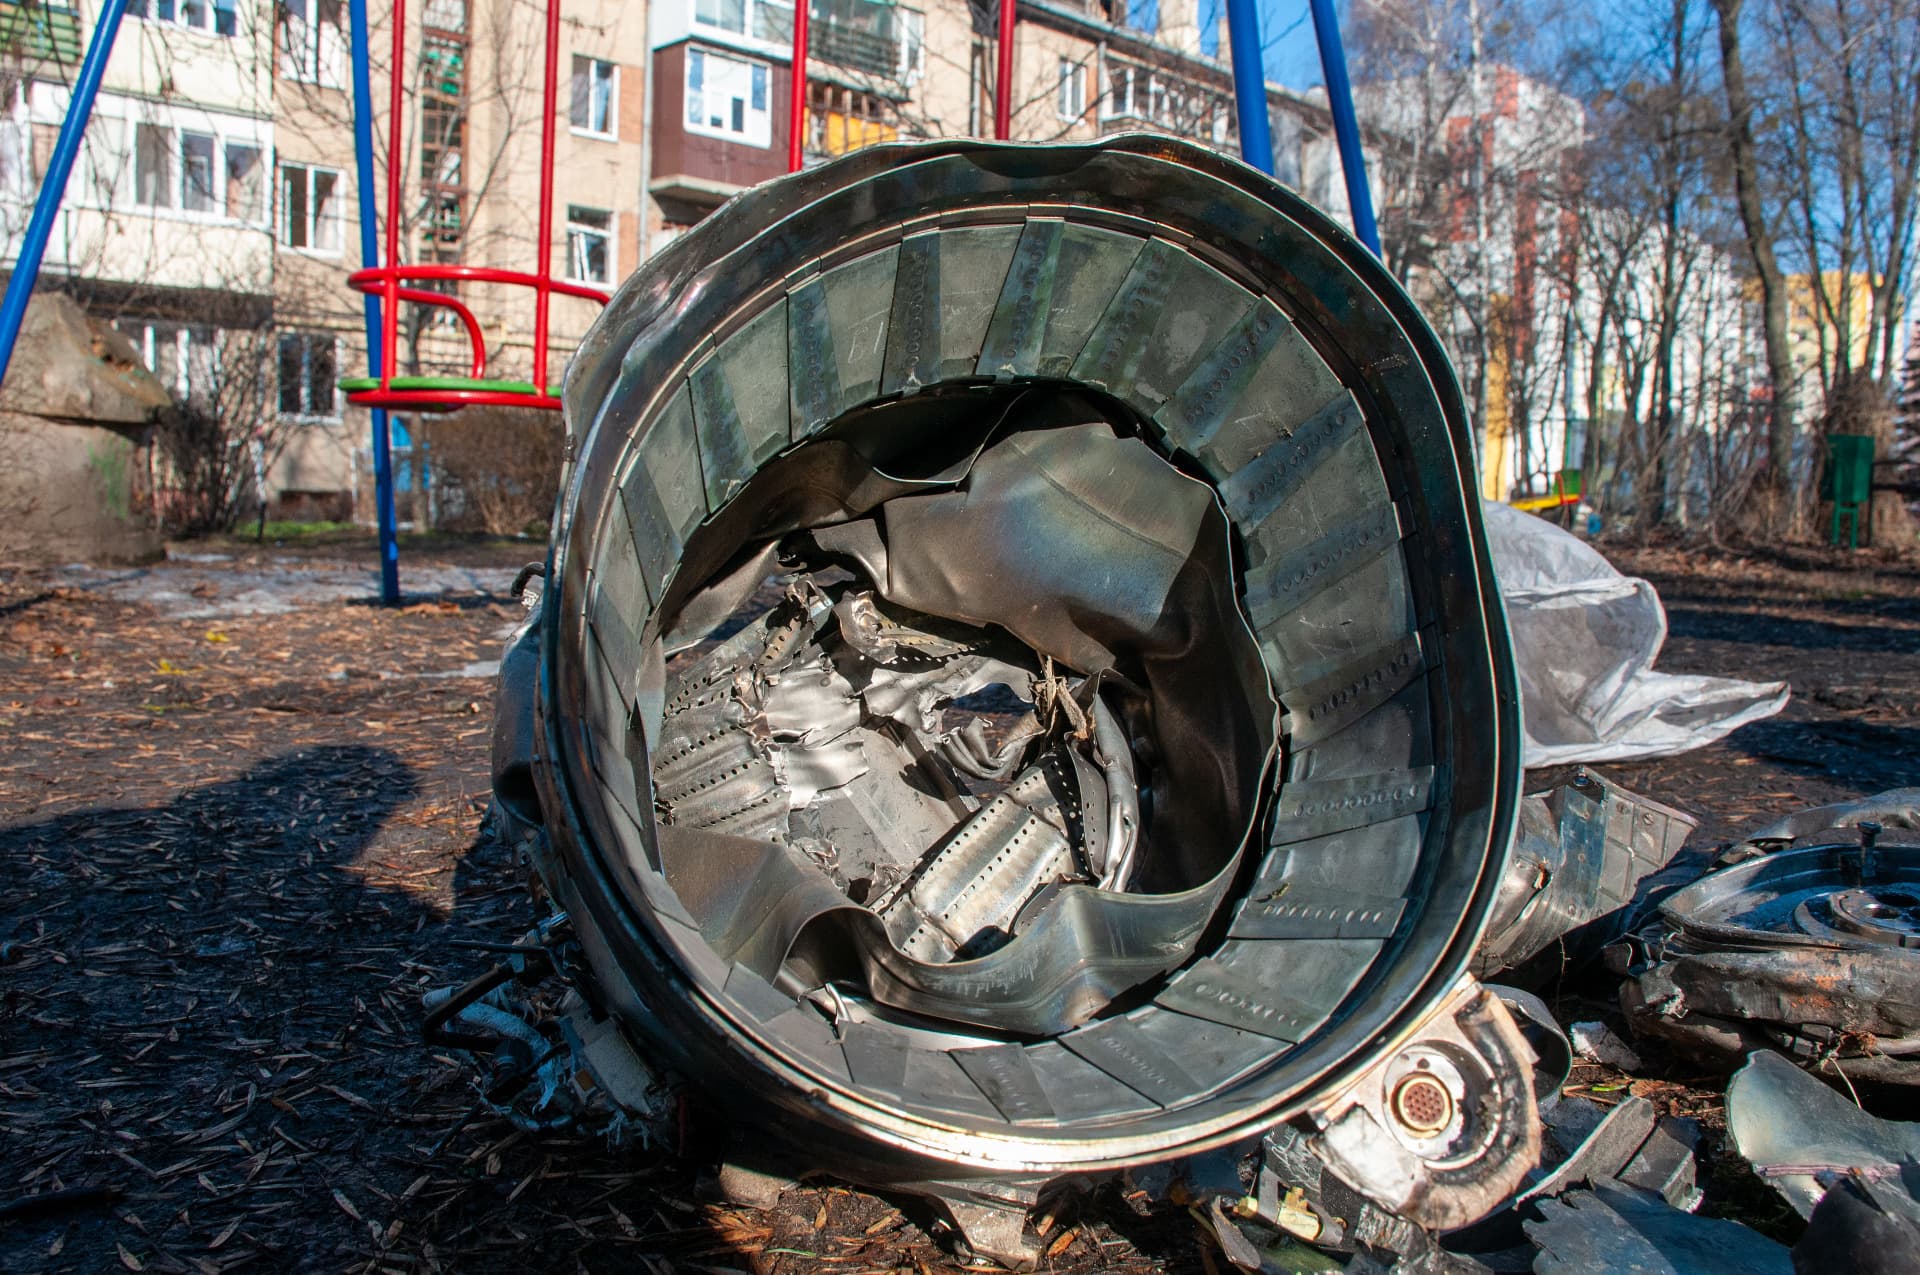  The wreckage of the rocket, on the playground